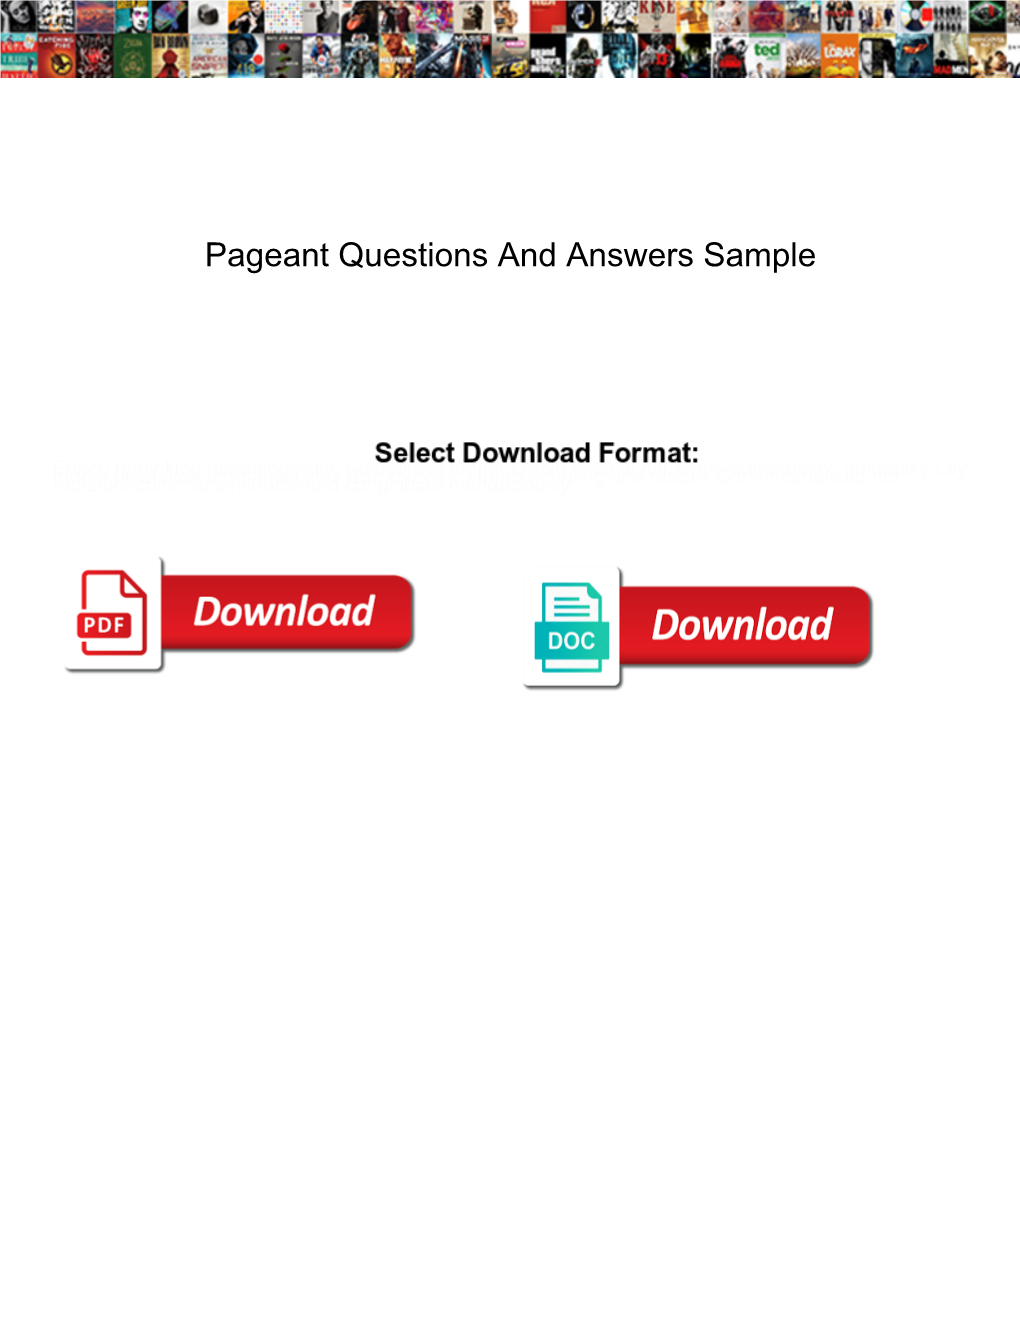 Pageant Questions and Answers Sample